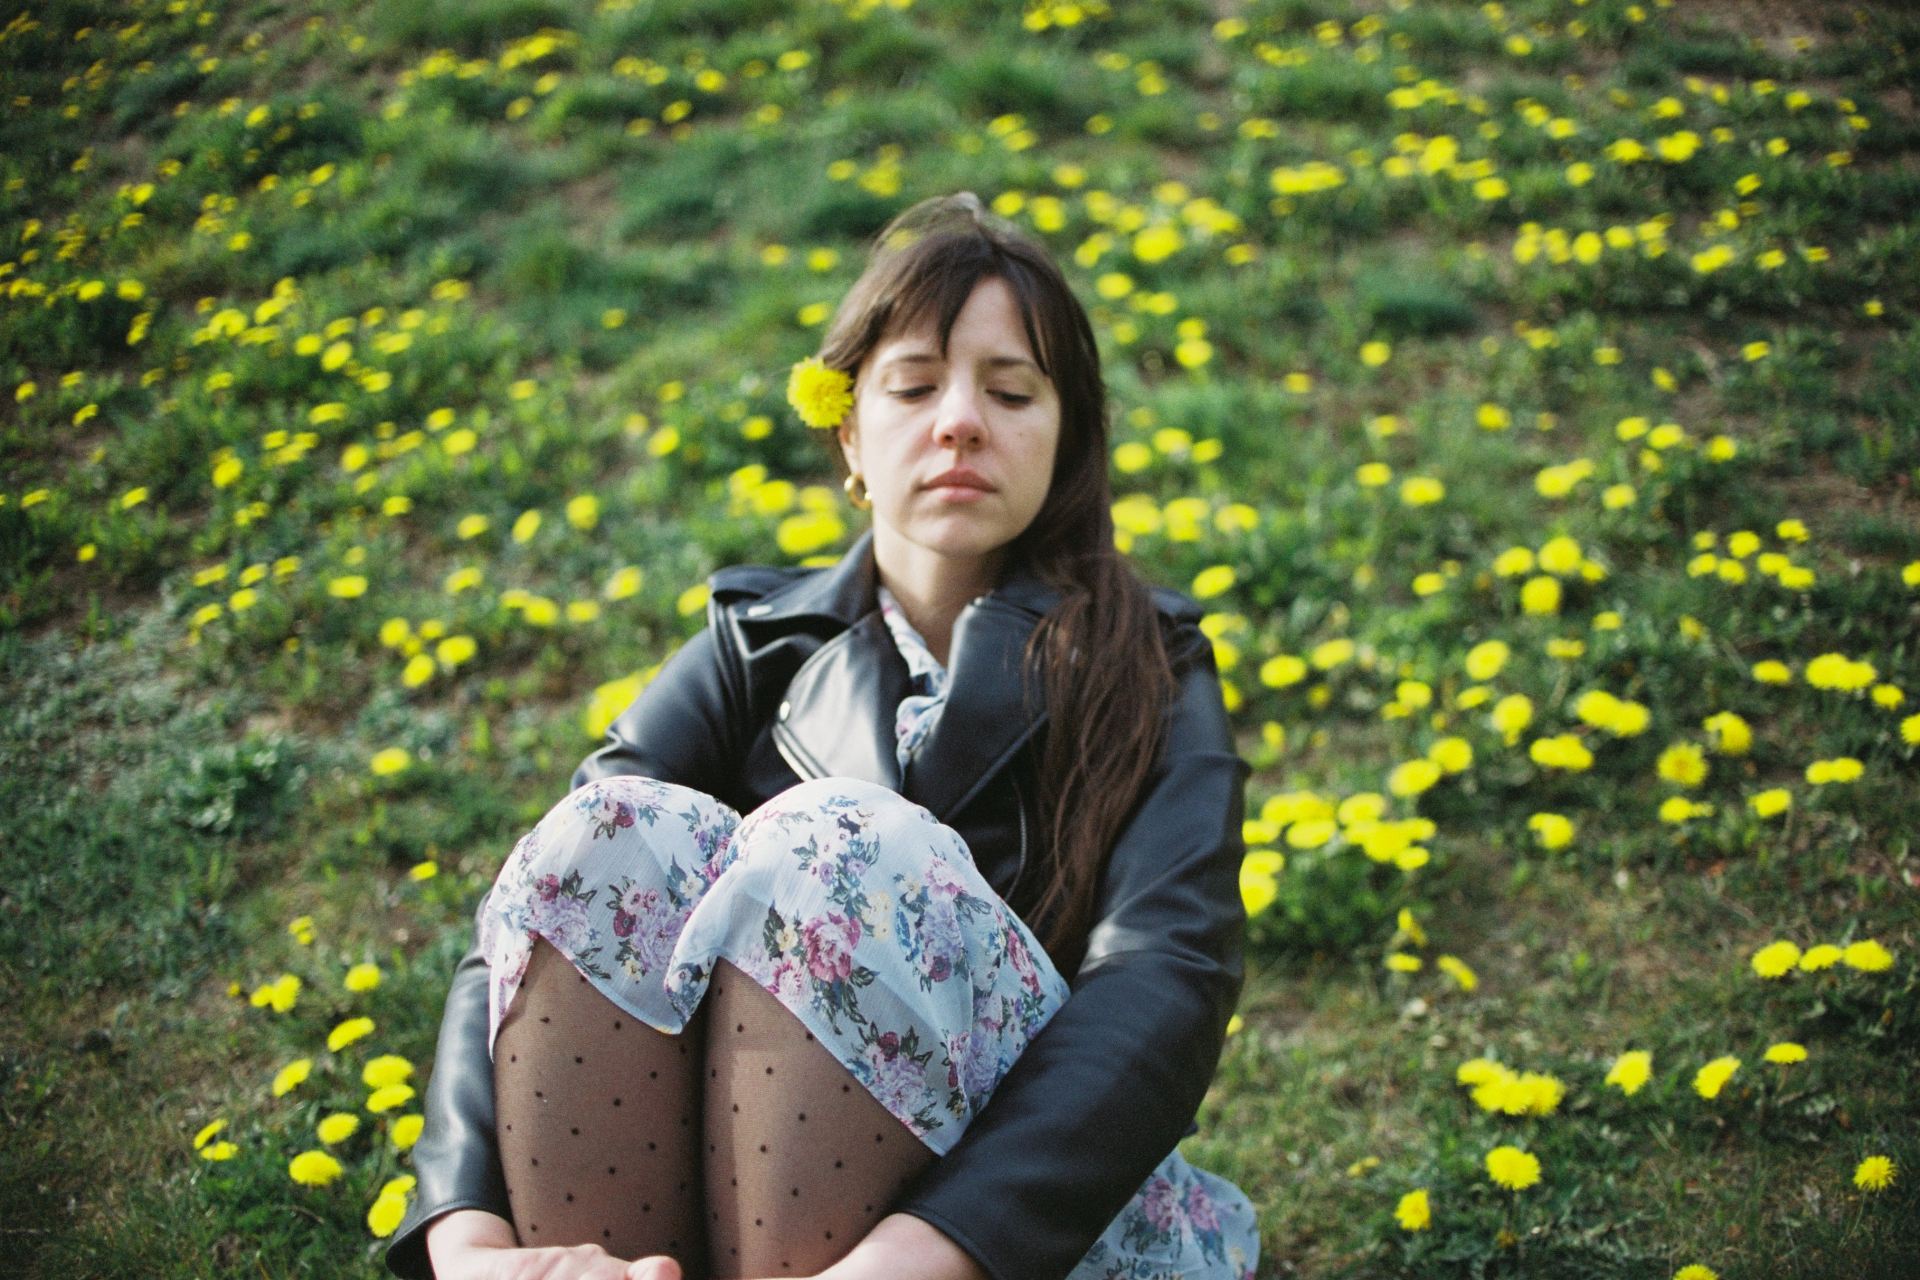 woman in black jacket sitting on yellow flower field during daytime